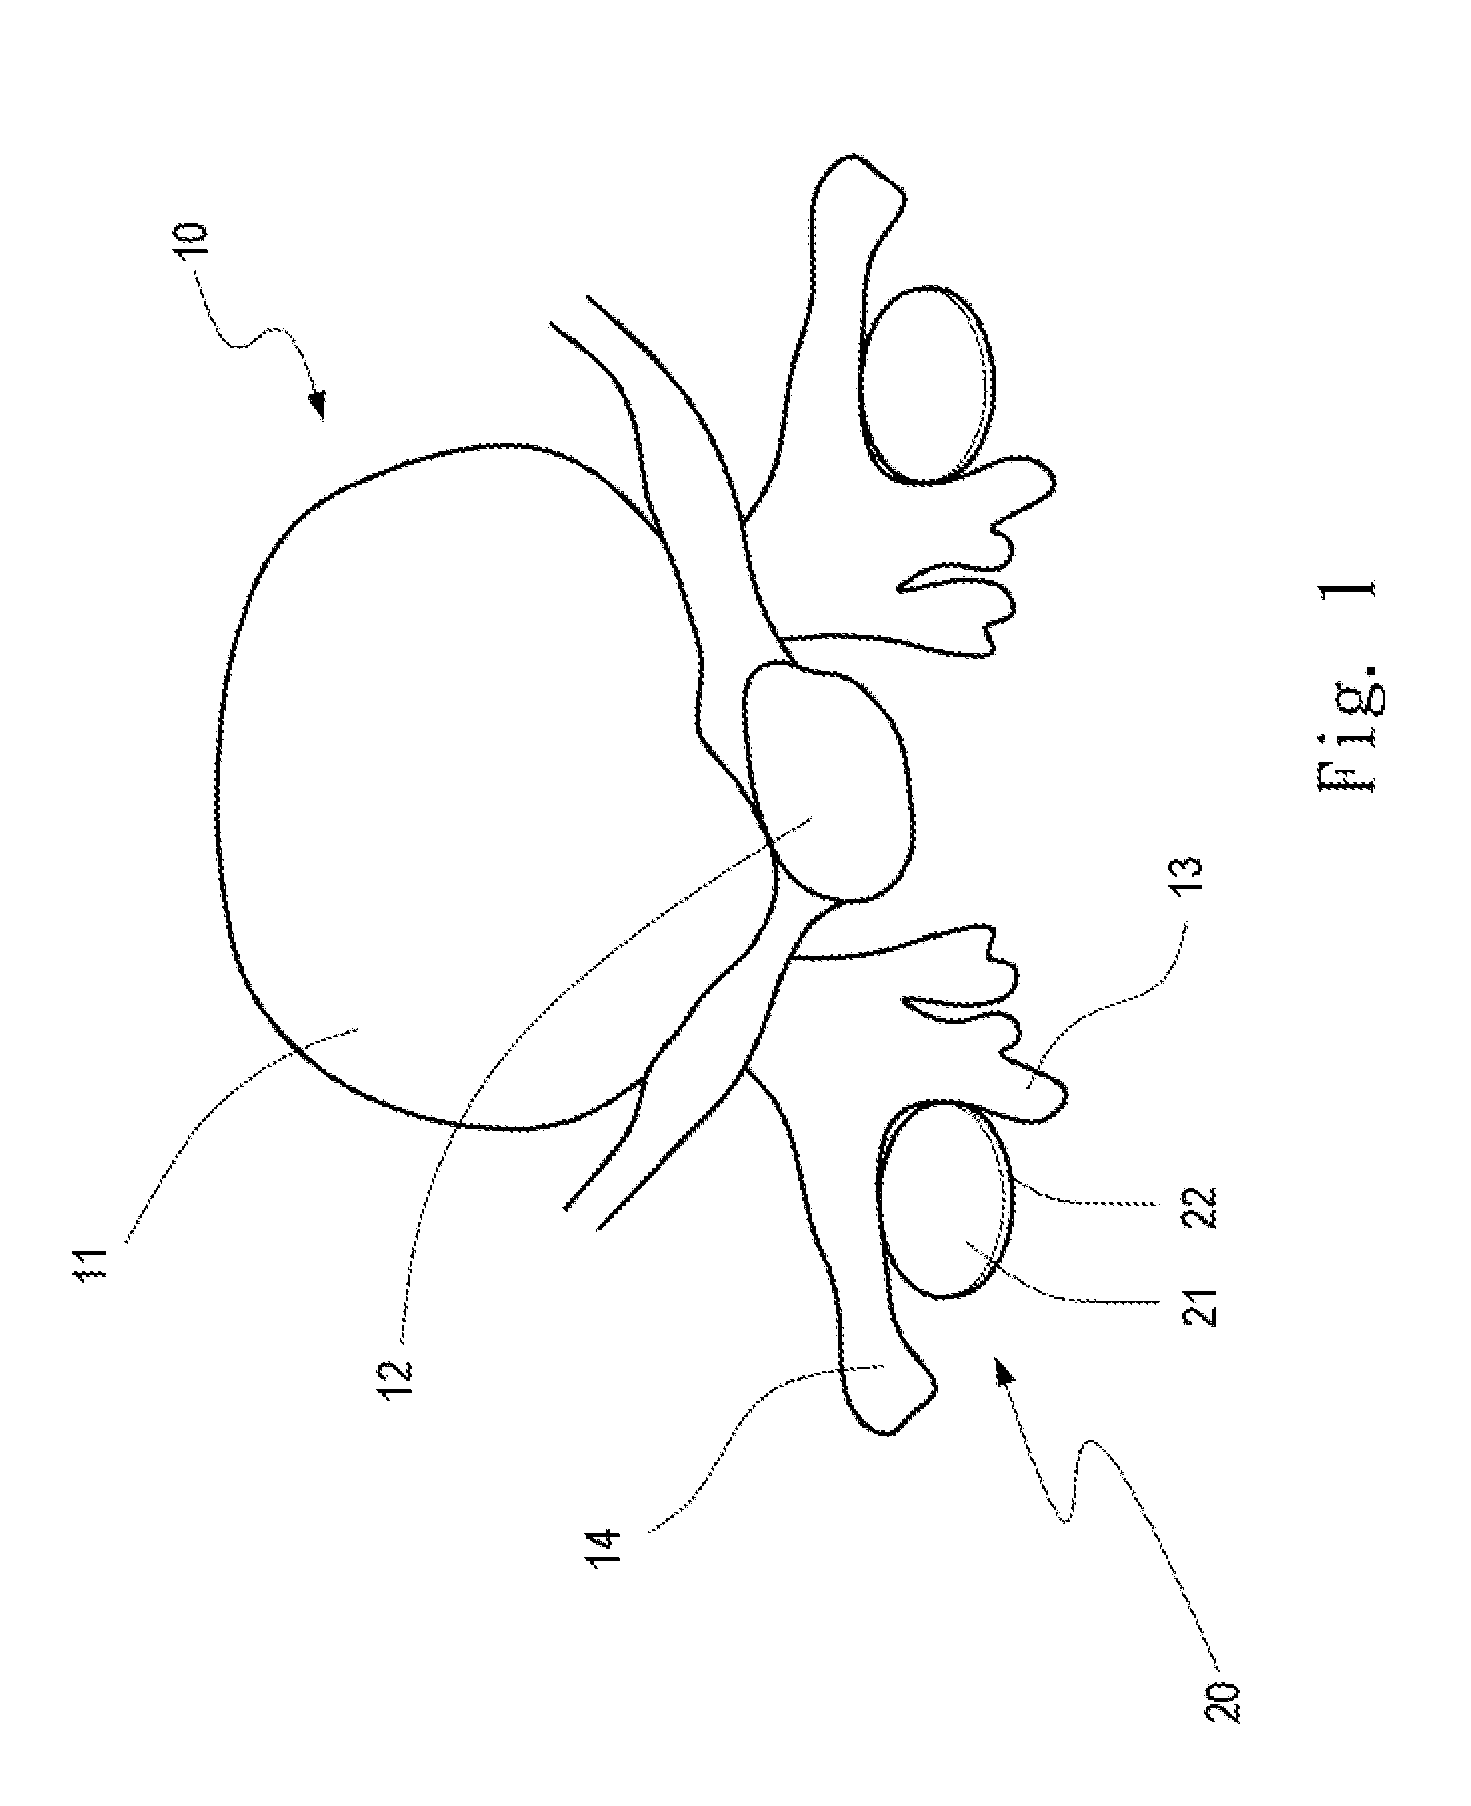 Spinal implant structure and method for manufacturing the same